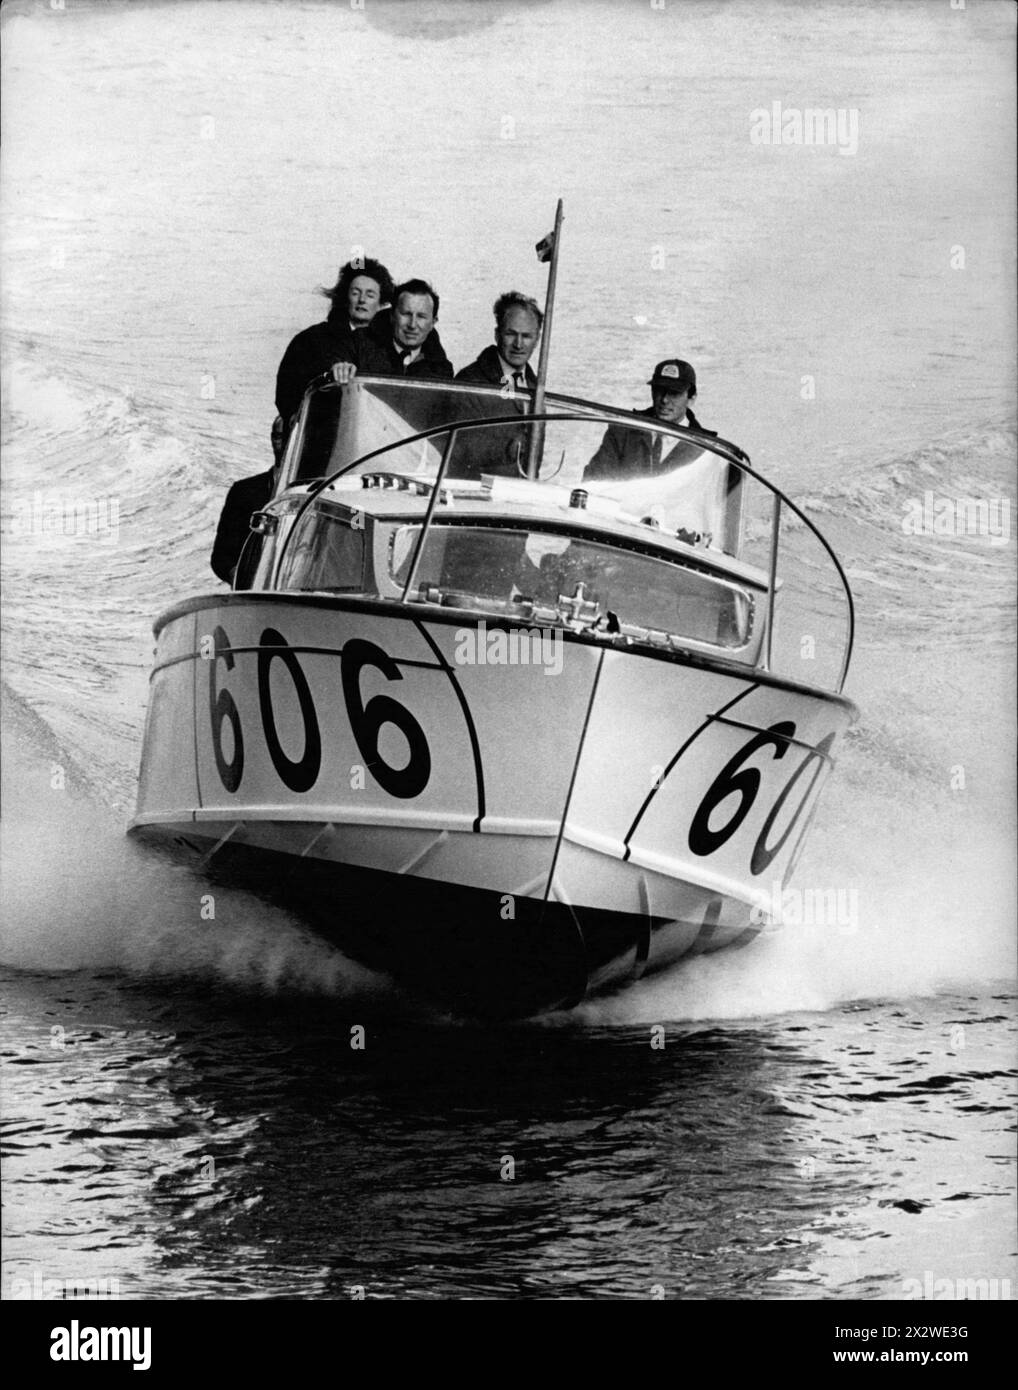 April 4, 1969, London, England: Ford powerboat team L-R: LADY AITKEN, DEREK MORRIS, PETER TWISS and JOHN FREEMAN aboard 606 the 'Seaspray' speeding down the Thames River. Ford's Aim For Powerboat Honors Ford has formed an offshore powerboat team. It will compose four Fairey Huntsman twin turbo-charged diesel power-boats, and their main target will be the Daily Telegraph BP Round Britain power boat race starting on July 26th from Portsmouth. One will be skippered by Lady Aitken, wife of Sir Aitken, chairman of the Beaverbrook Newspapers, and another one will be skippered by Peter Twiss, a forme Stock Photo